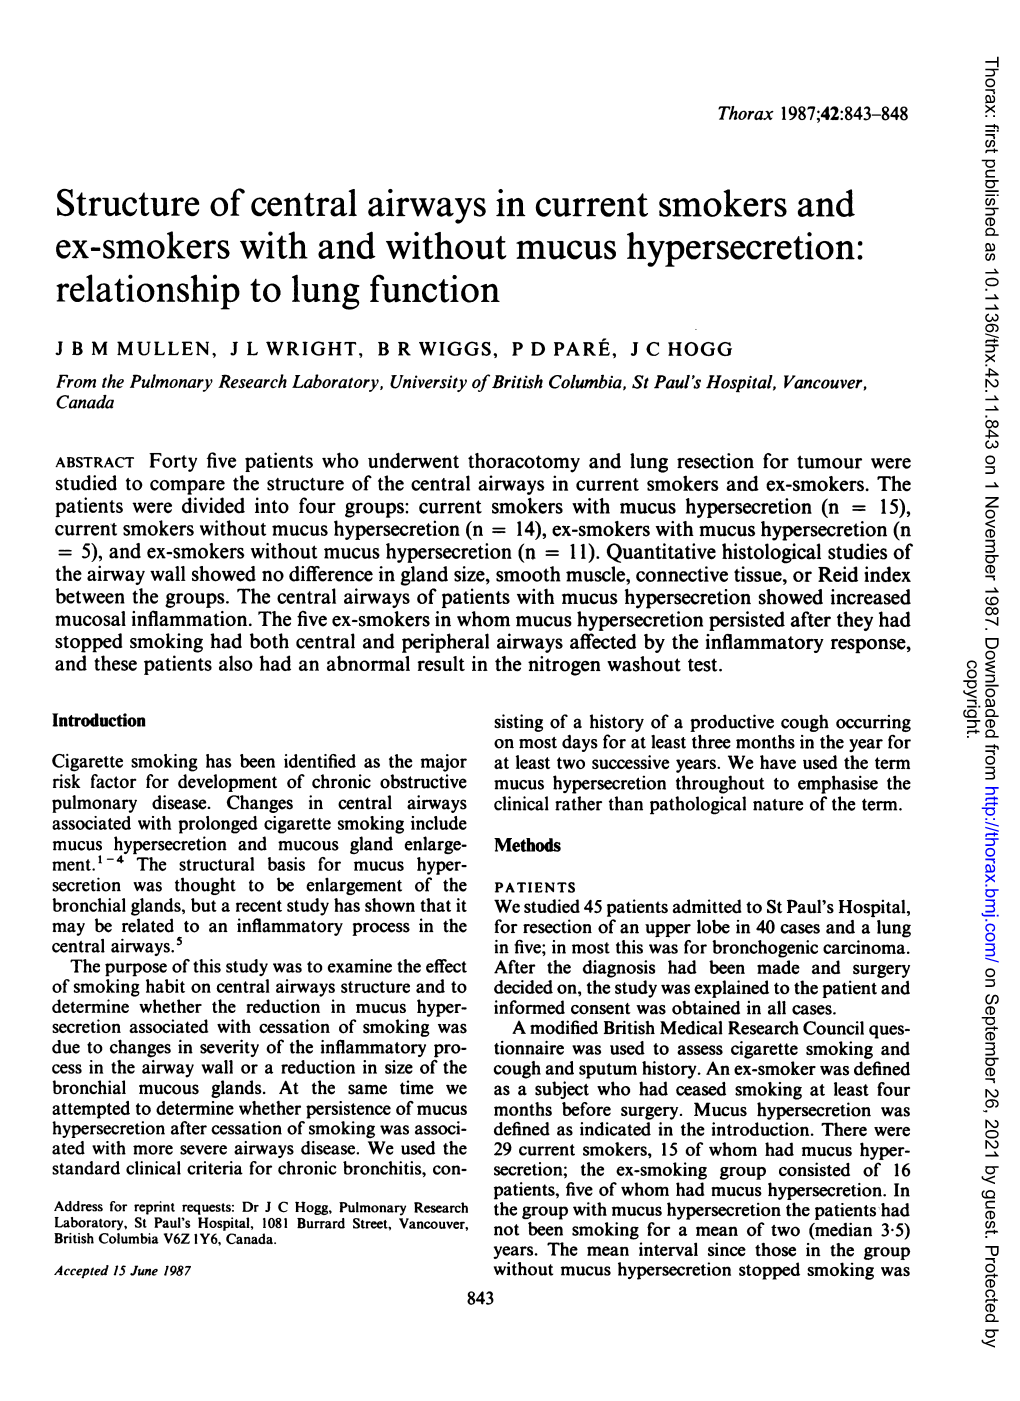 Structure of Central Airways in Current Smokers and Ex-Smokers with and Without Mucus Hypersecretion: Relationship to Lung Function